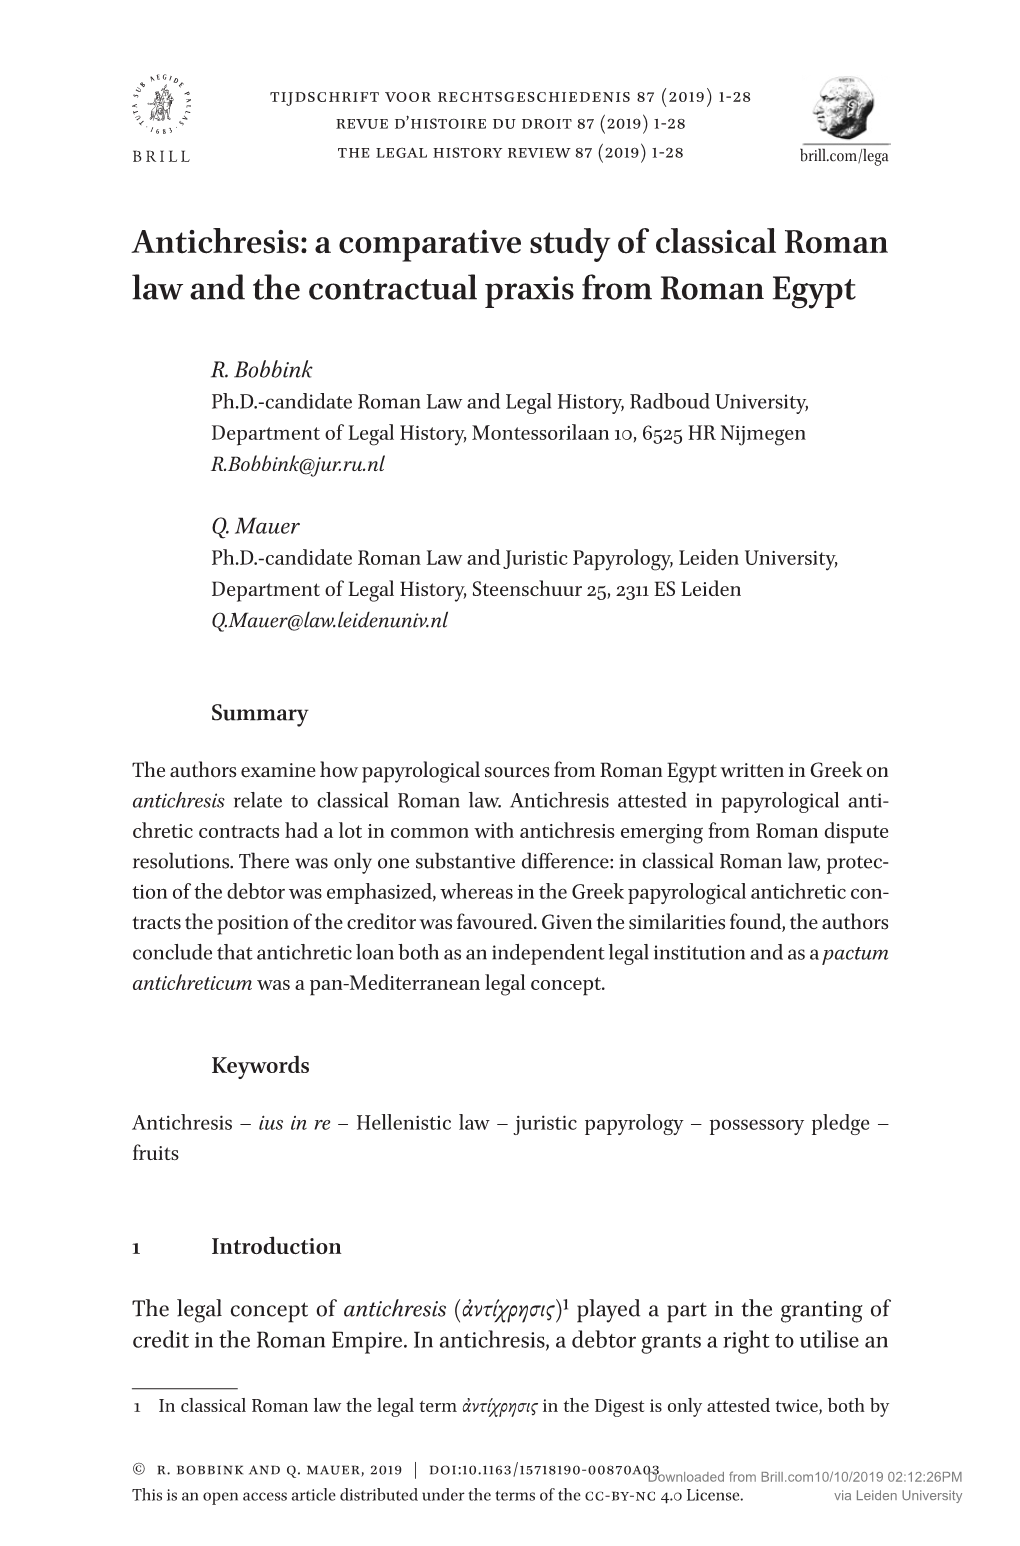 Antichresis: a Comparative Study of Classical Roman Law and the Contractual Praxis from Roman Egypt